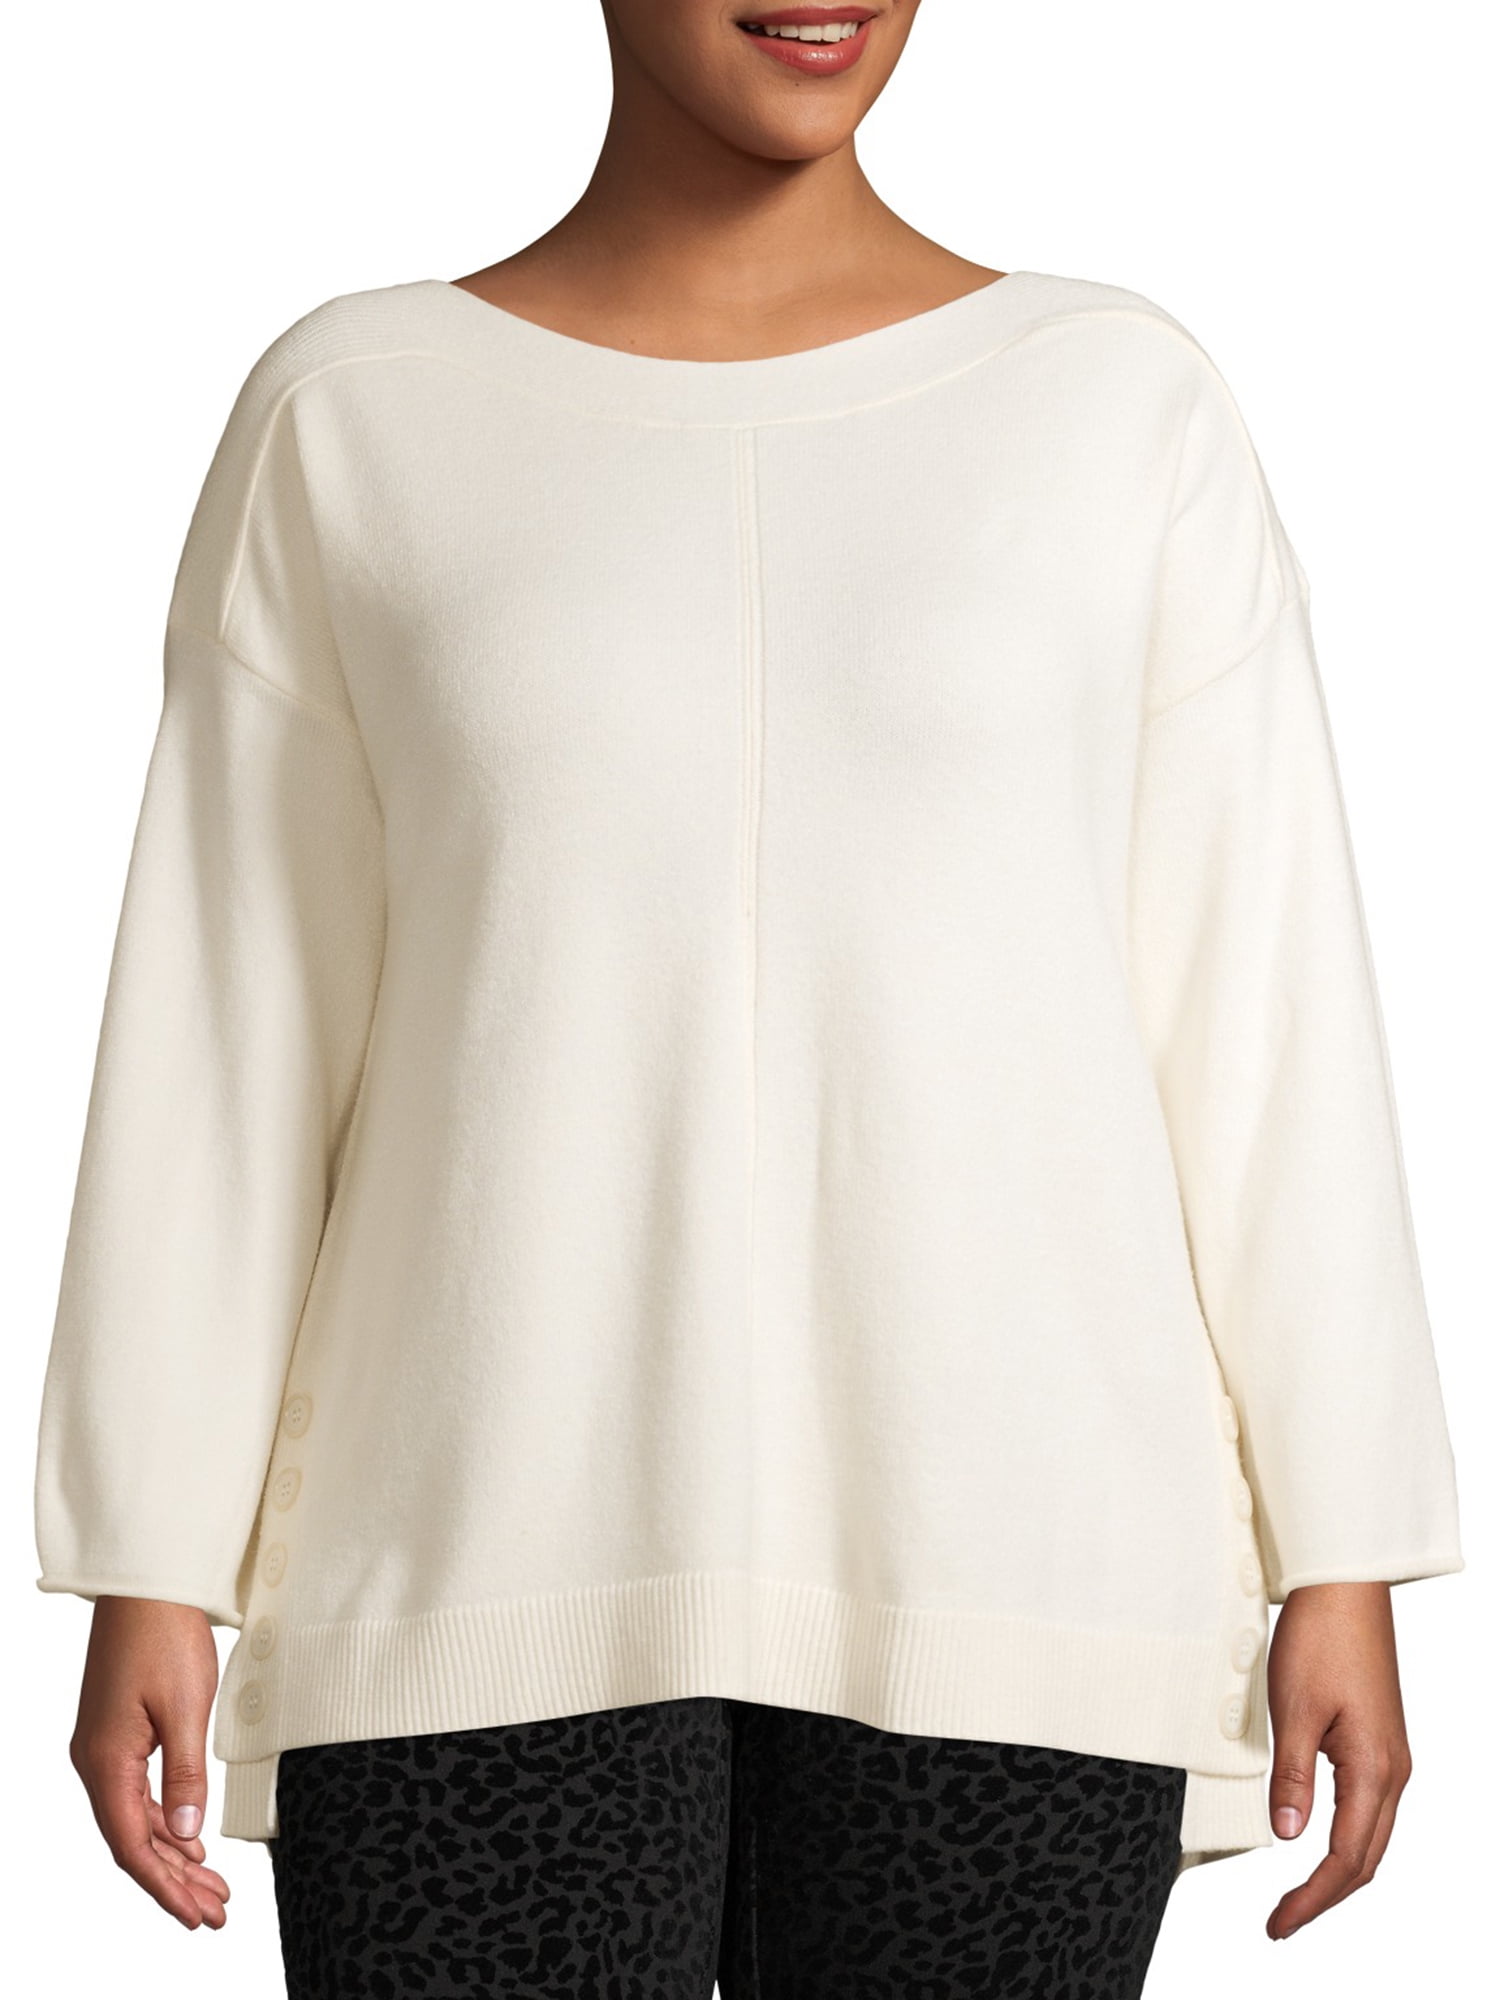 Terra & Sky Women's Plus Size Boat Neck Sweater With Button Trim ...